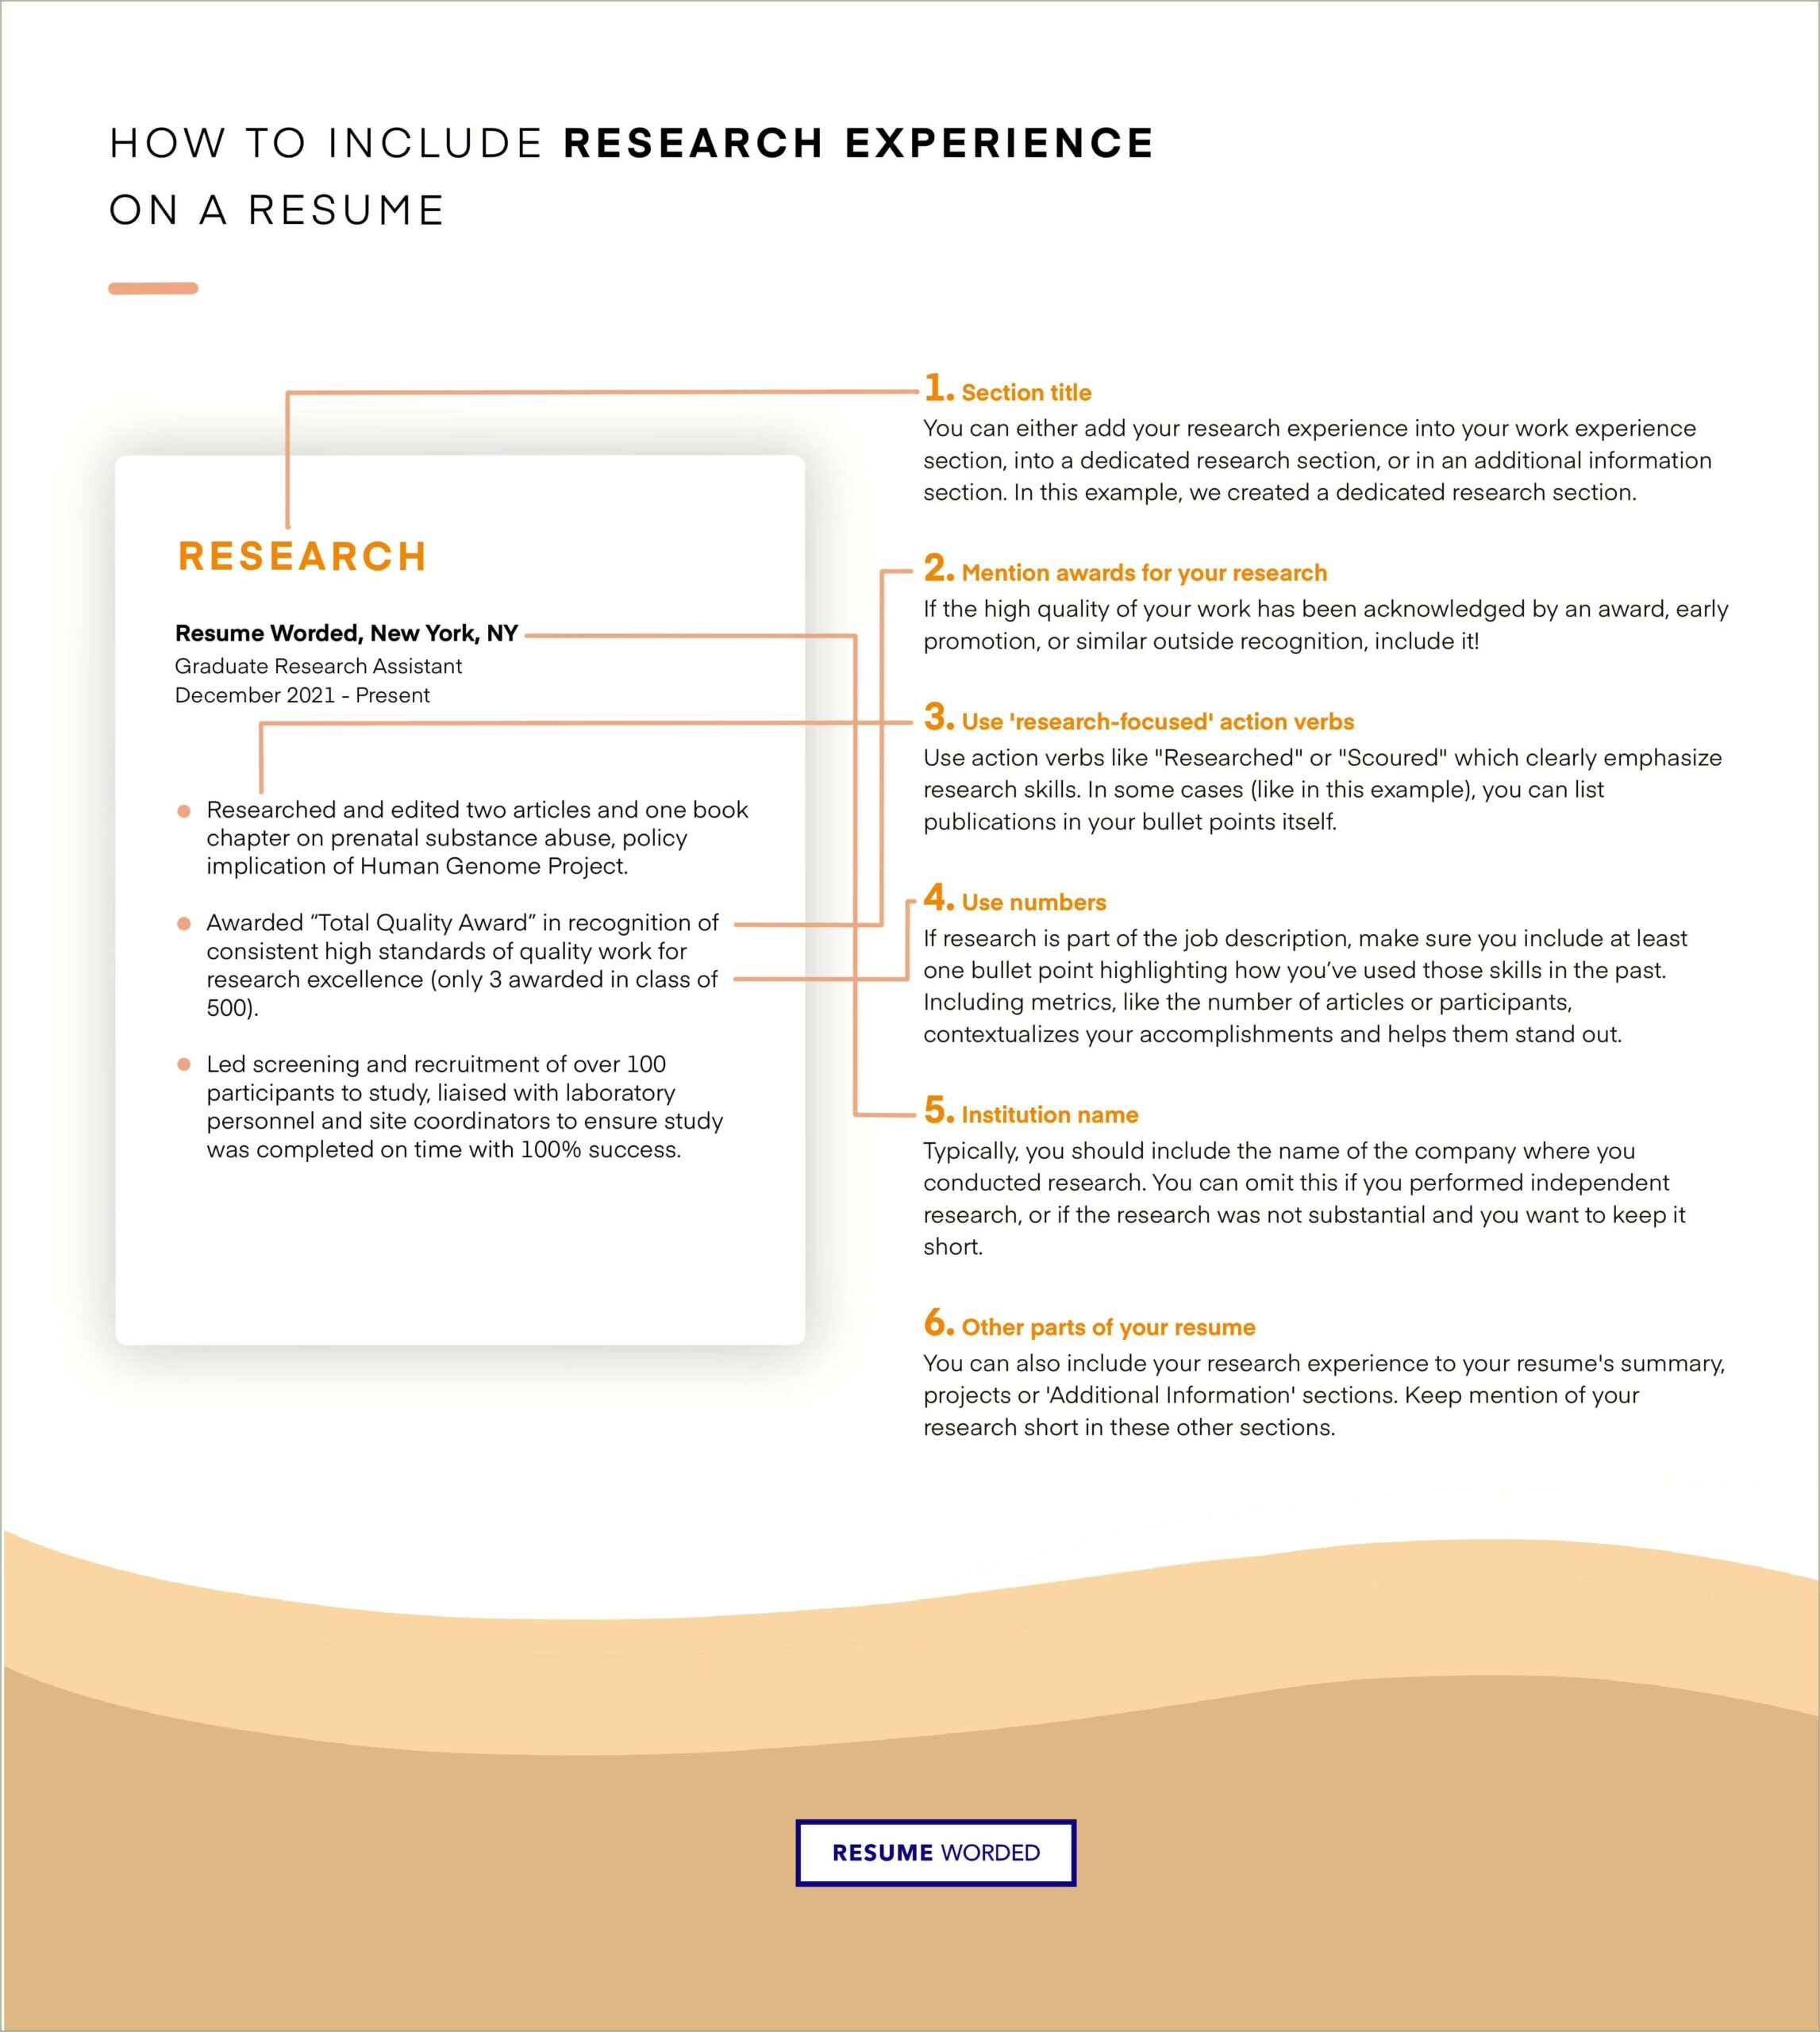 Does Research Experience Count On Resume